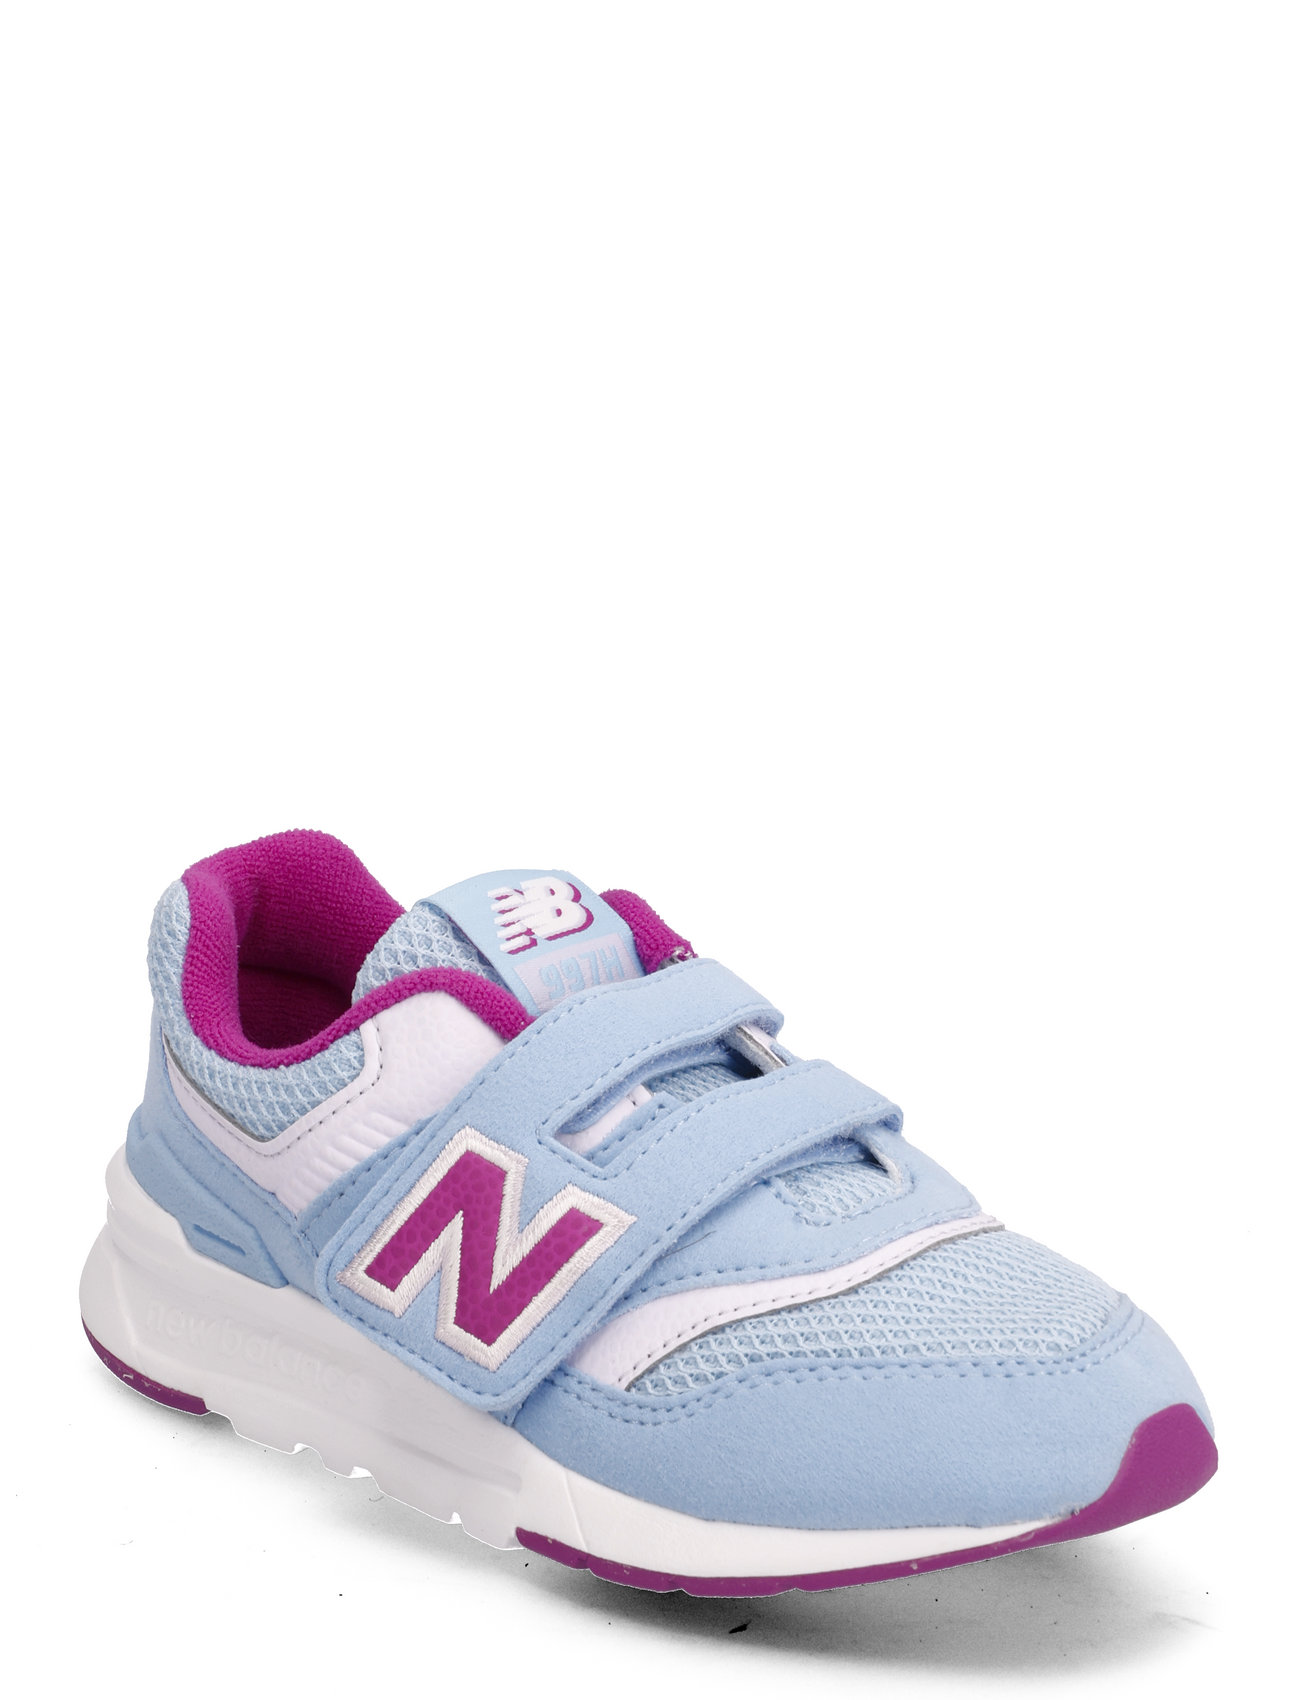 New Balance 997H Hook & Loop Shoes Sports Shoes Running-training Shoes Blue New Balance